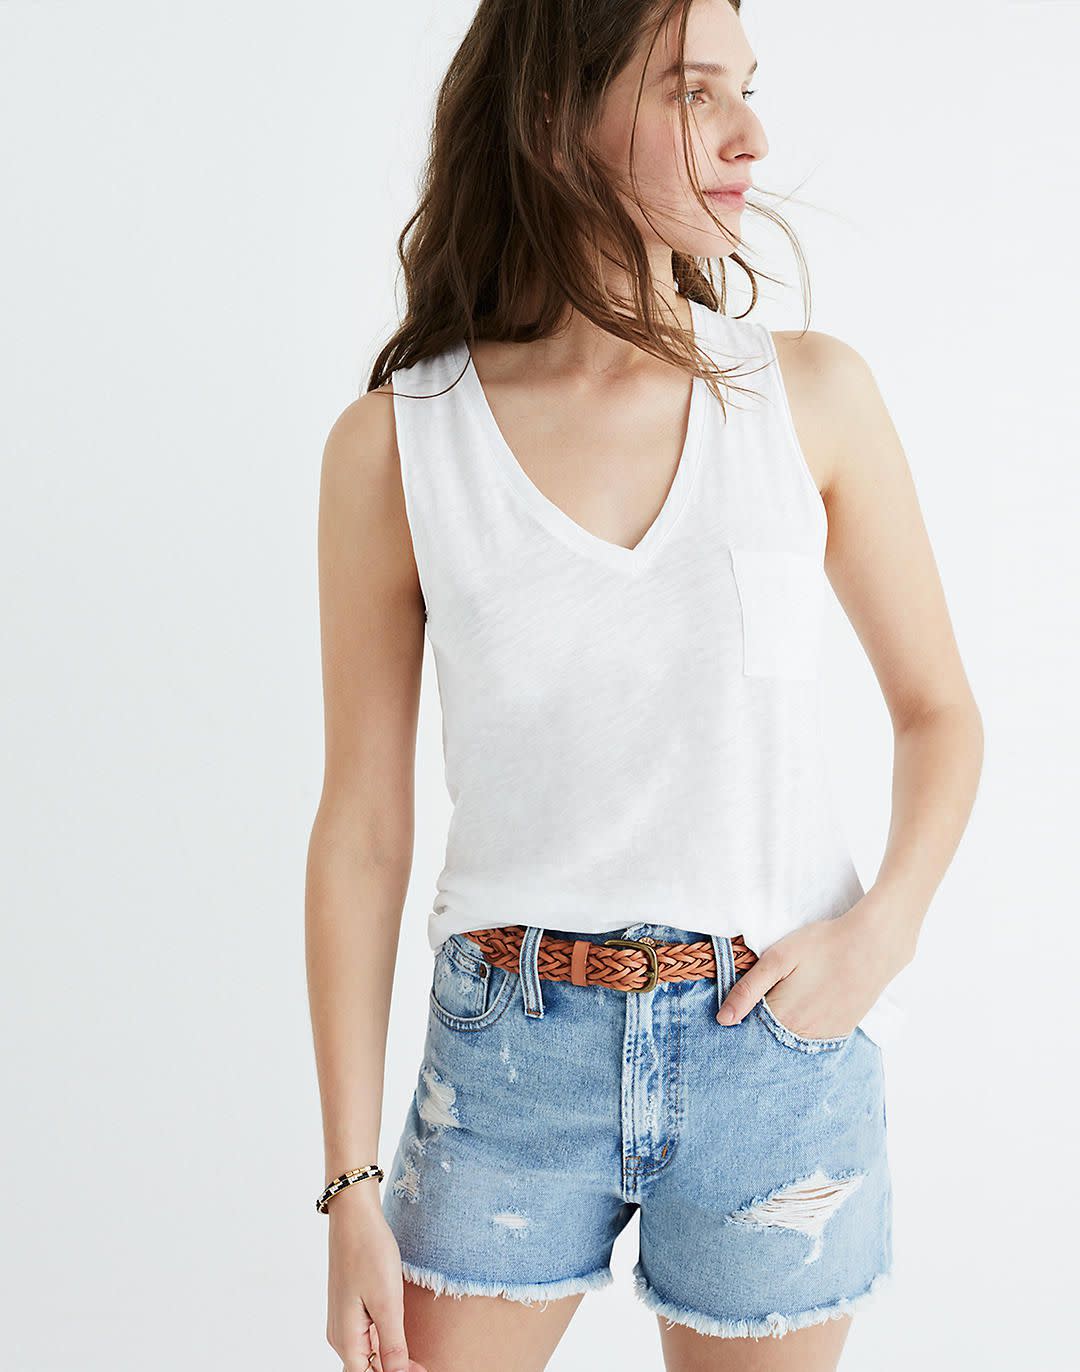 Madewell: What to Buy